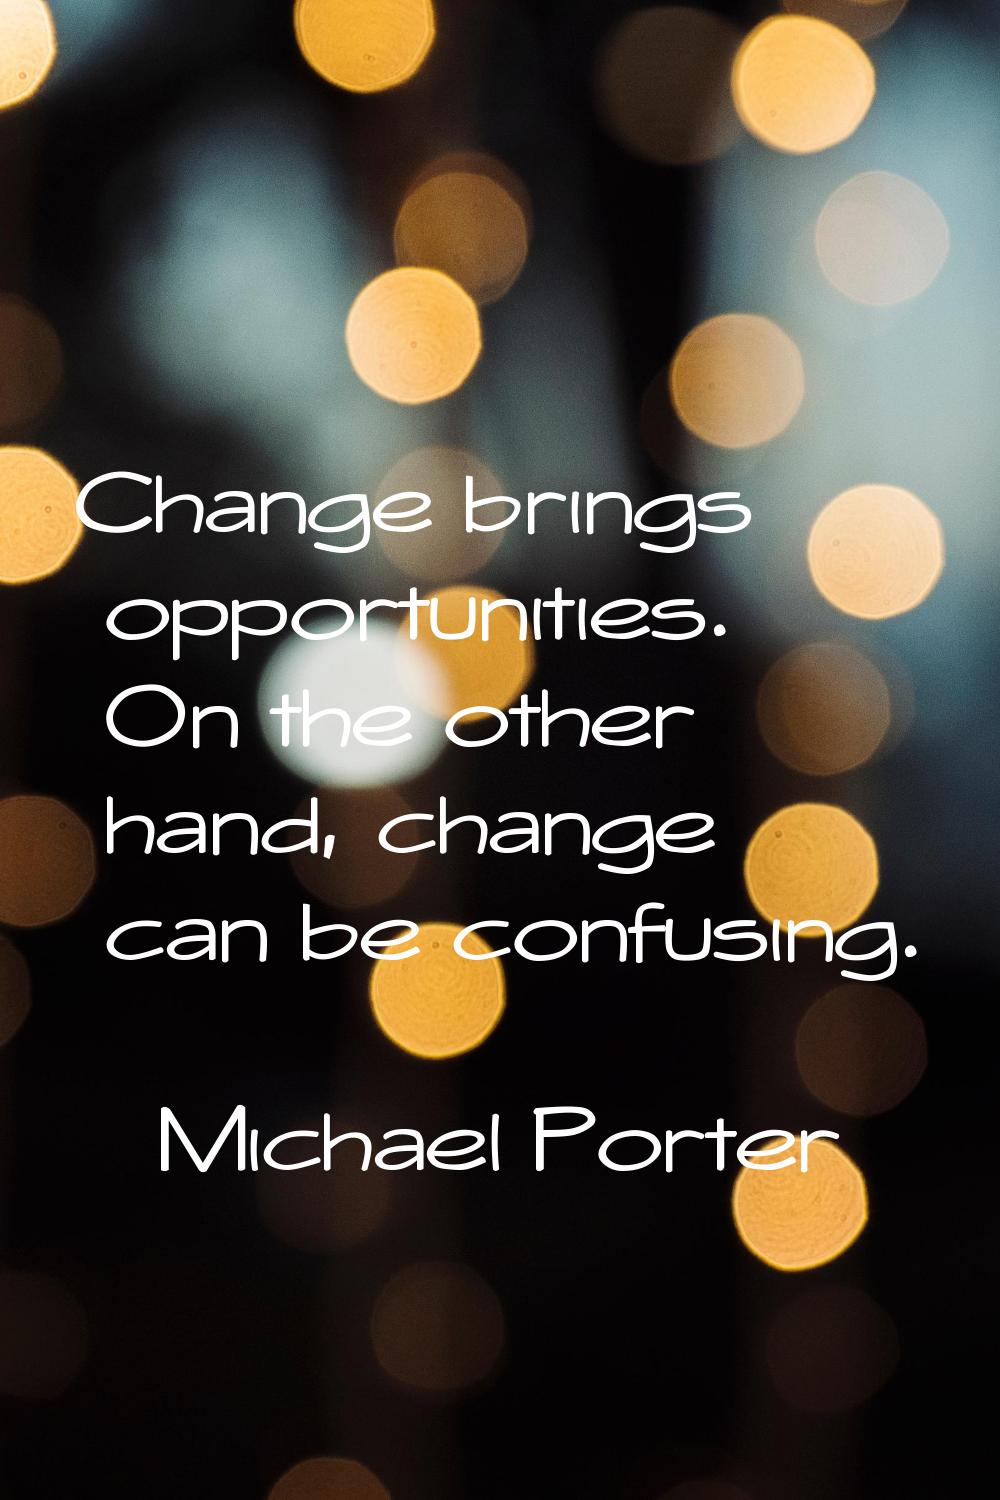 Change brings opportunities. On the other hand, change can be confusing.